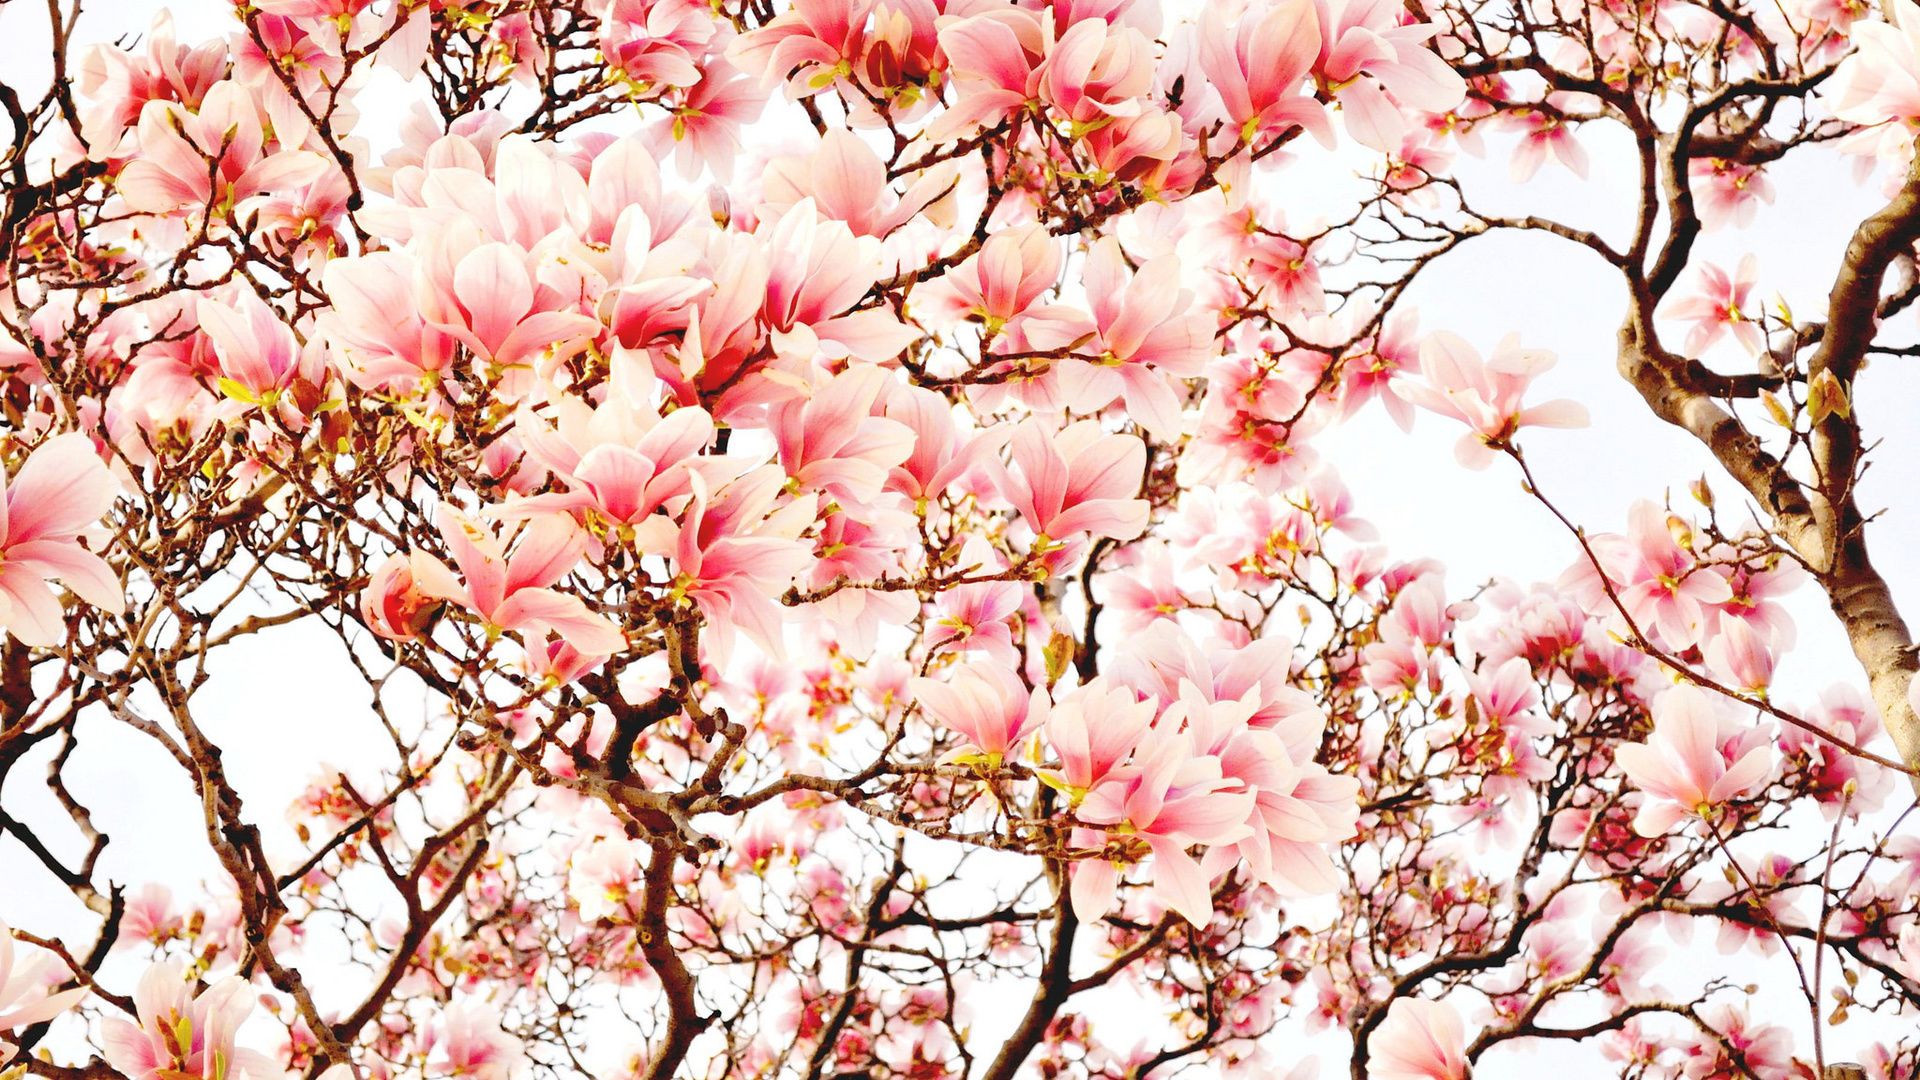 Magnolia High Resolution Backgrounds